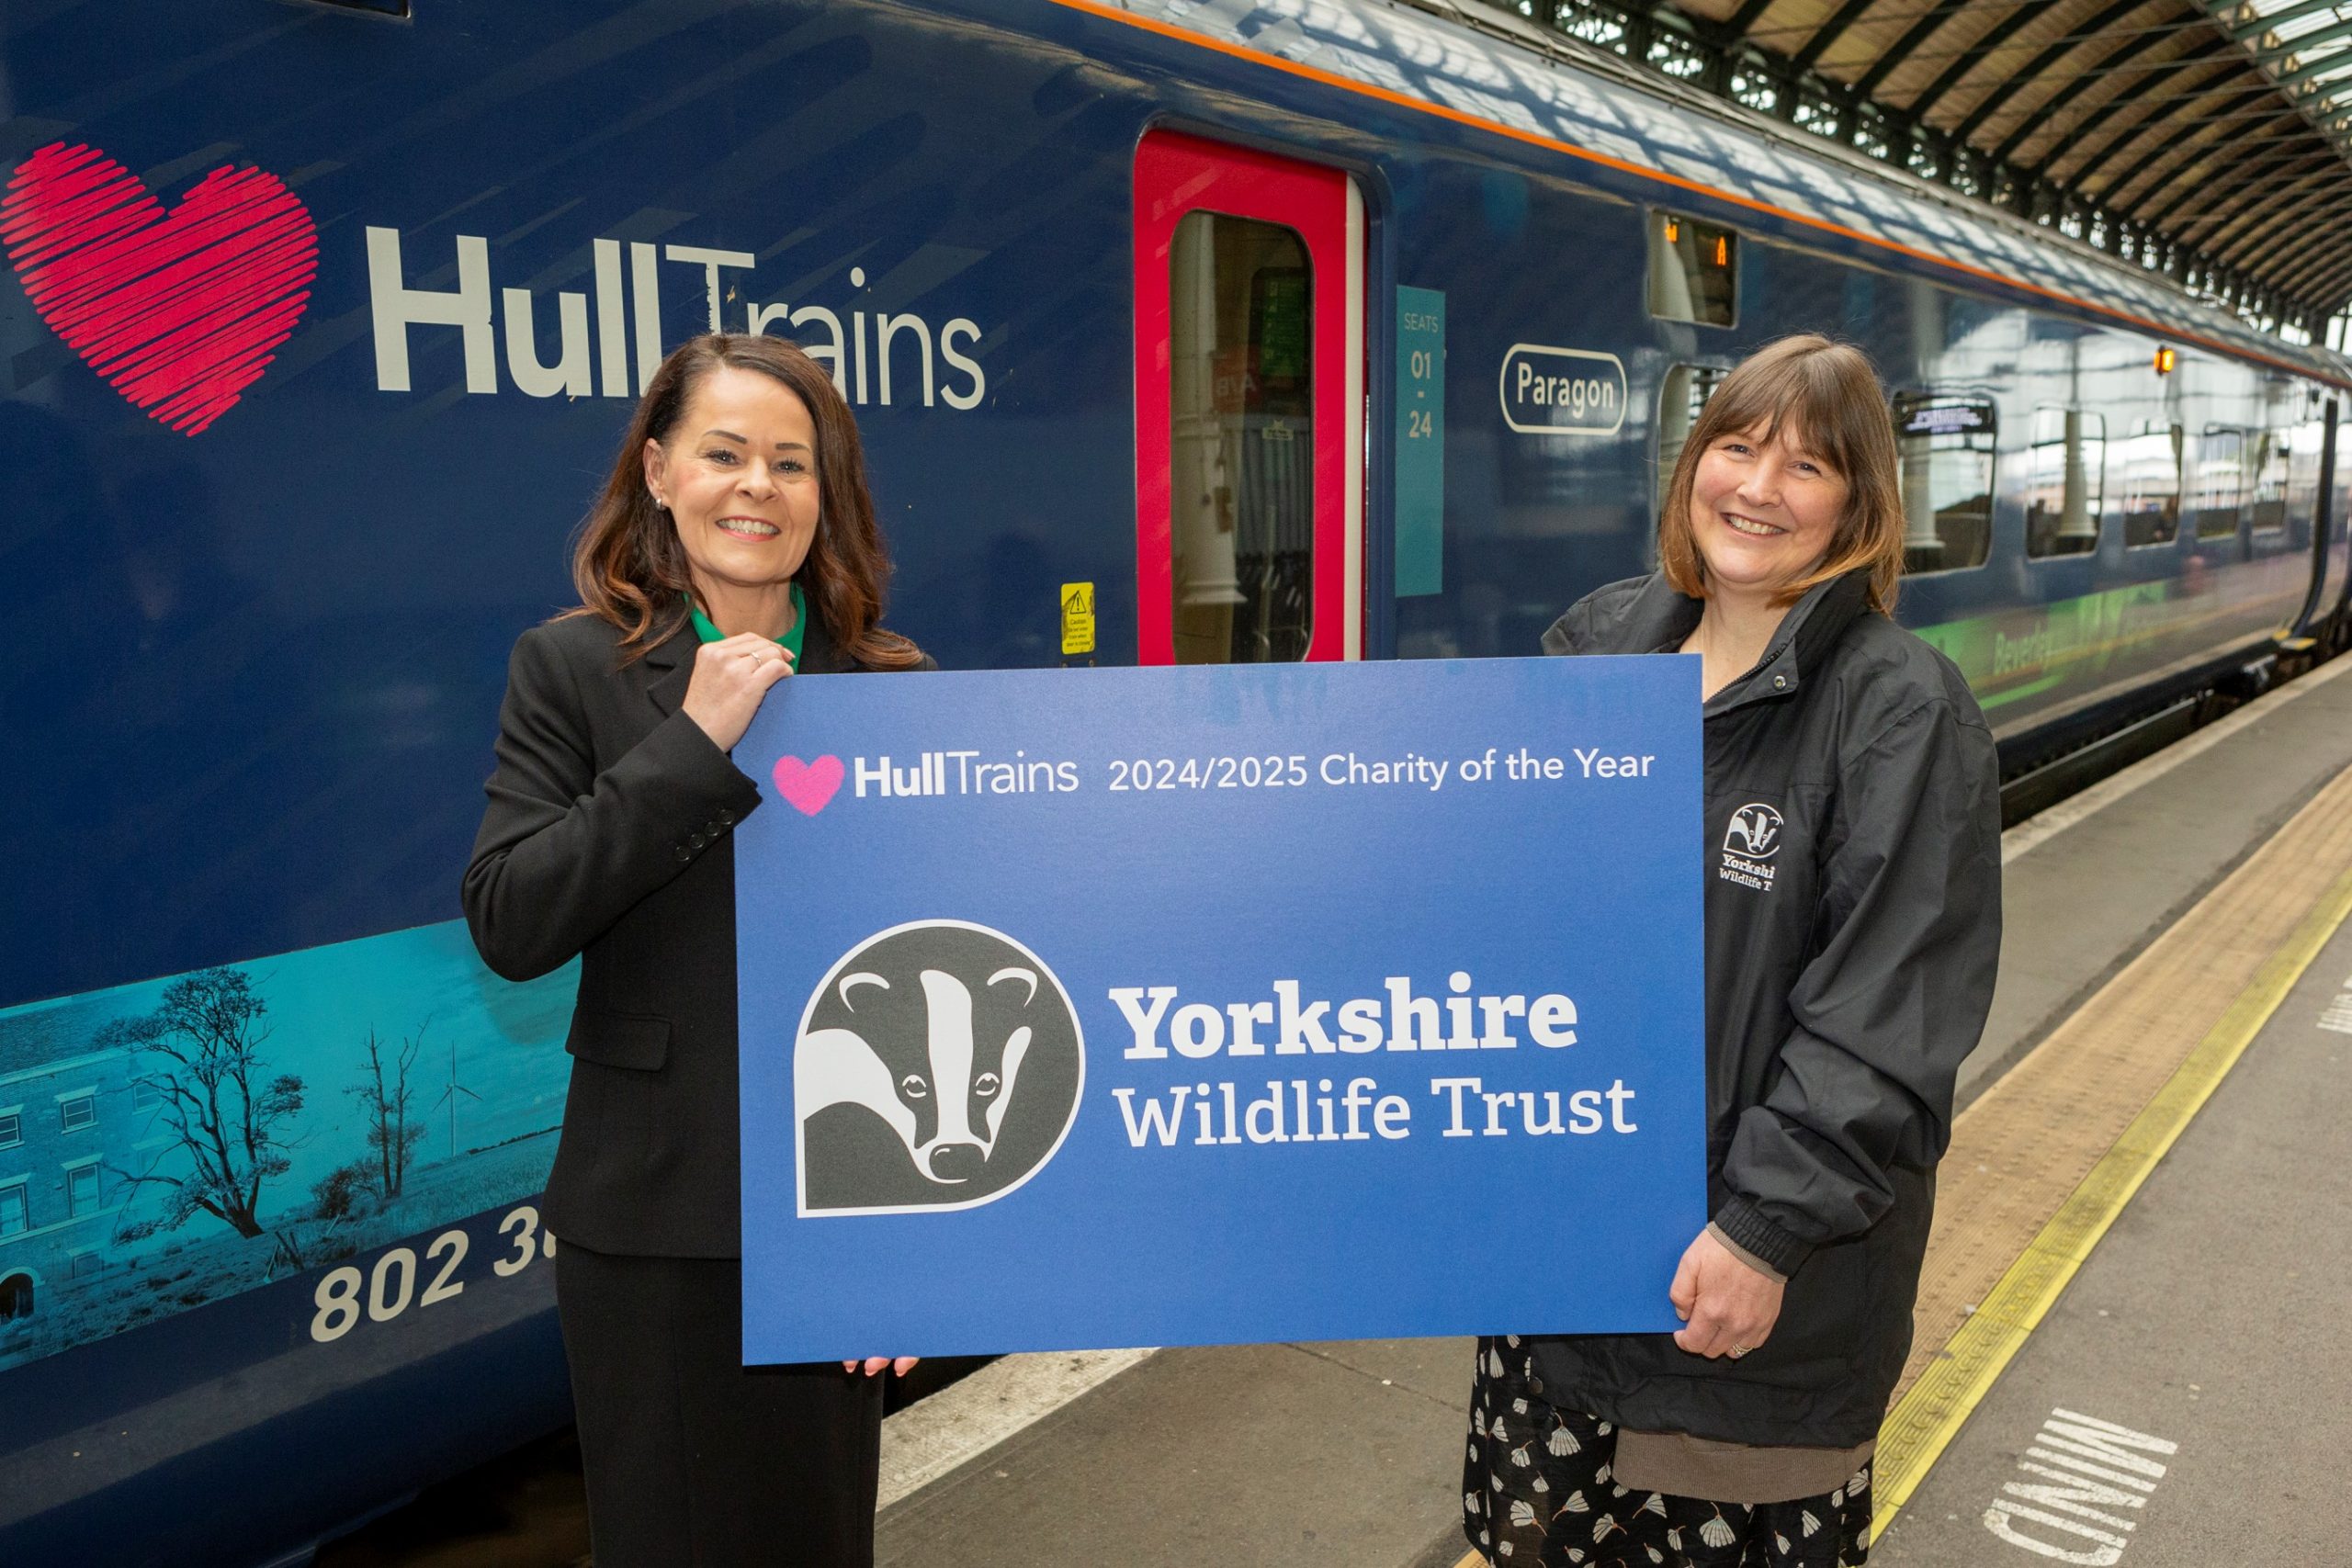 hull trains earth day